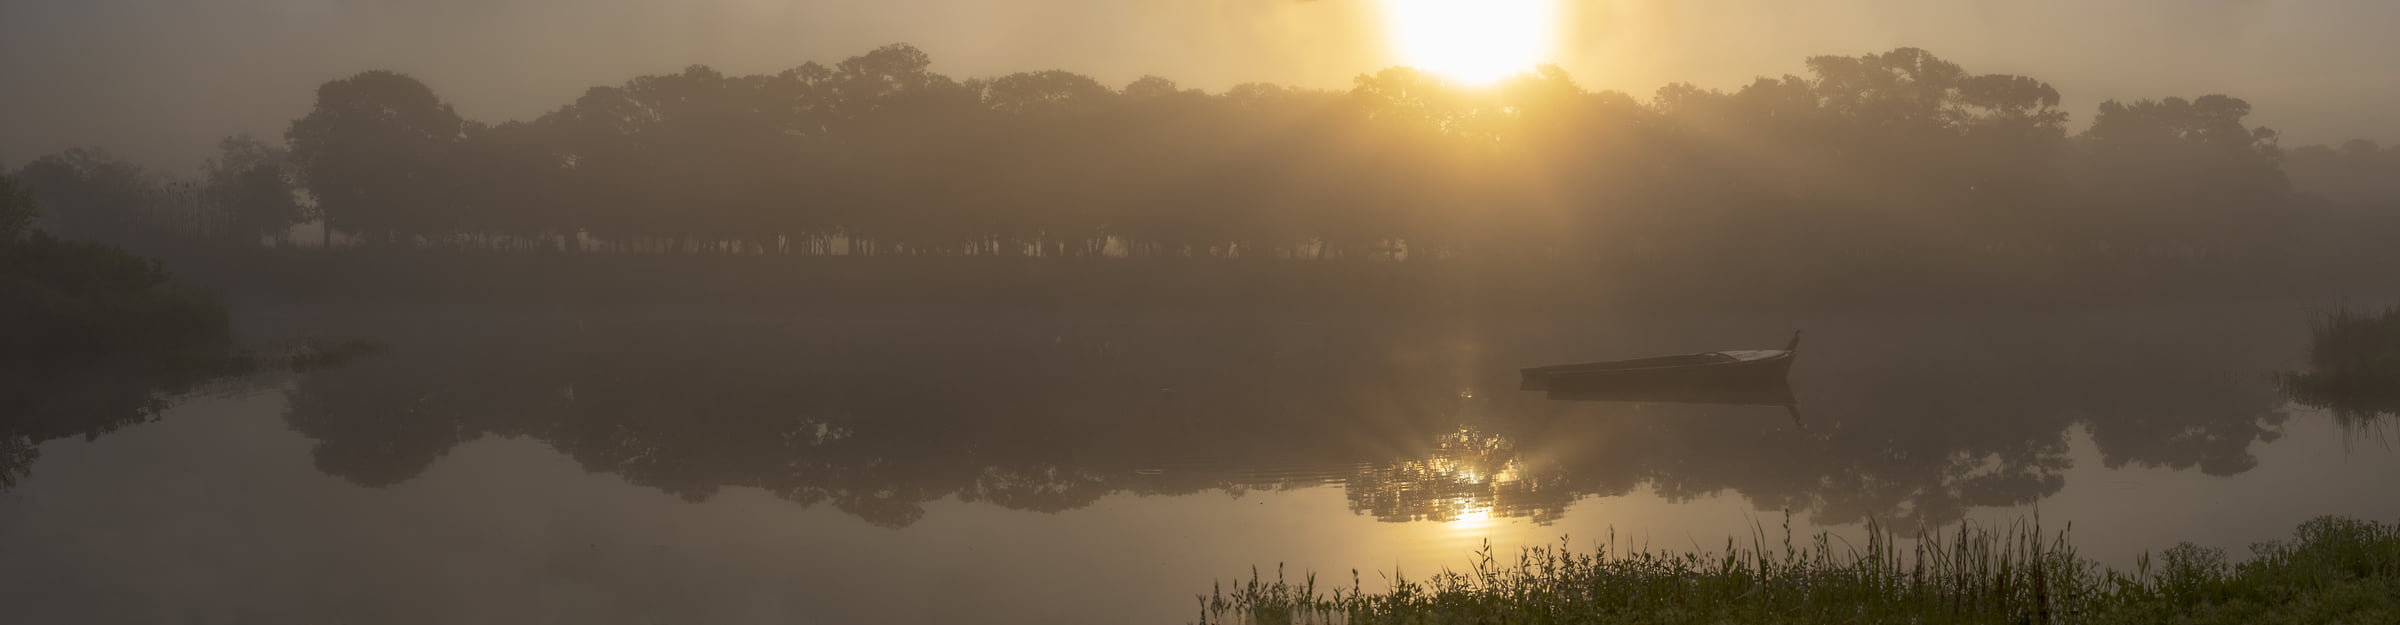 679 megapixels! A very high resolution, large-format VAST photo print of a foggy sunrise; panorama photograph created by John Freeman in Jones Creek, TX.